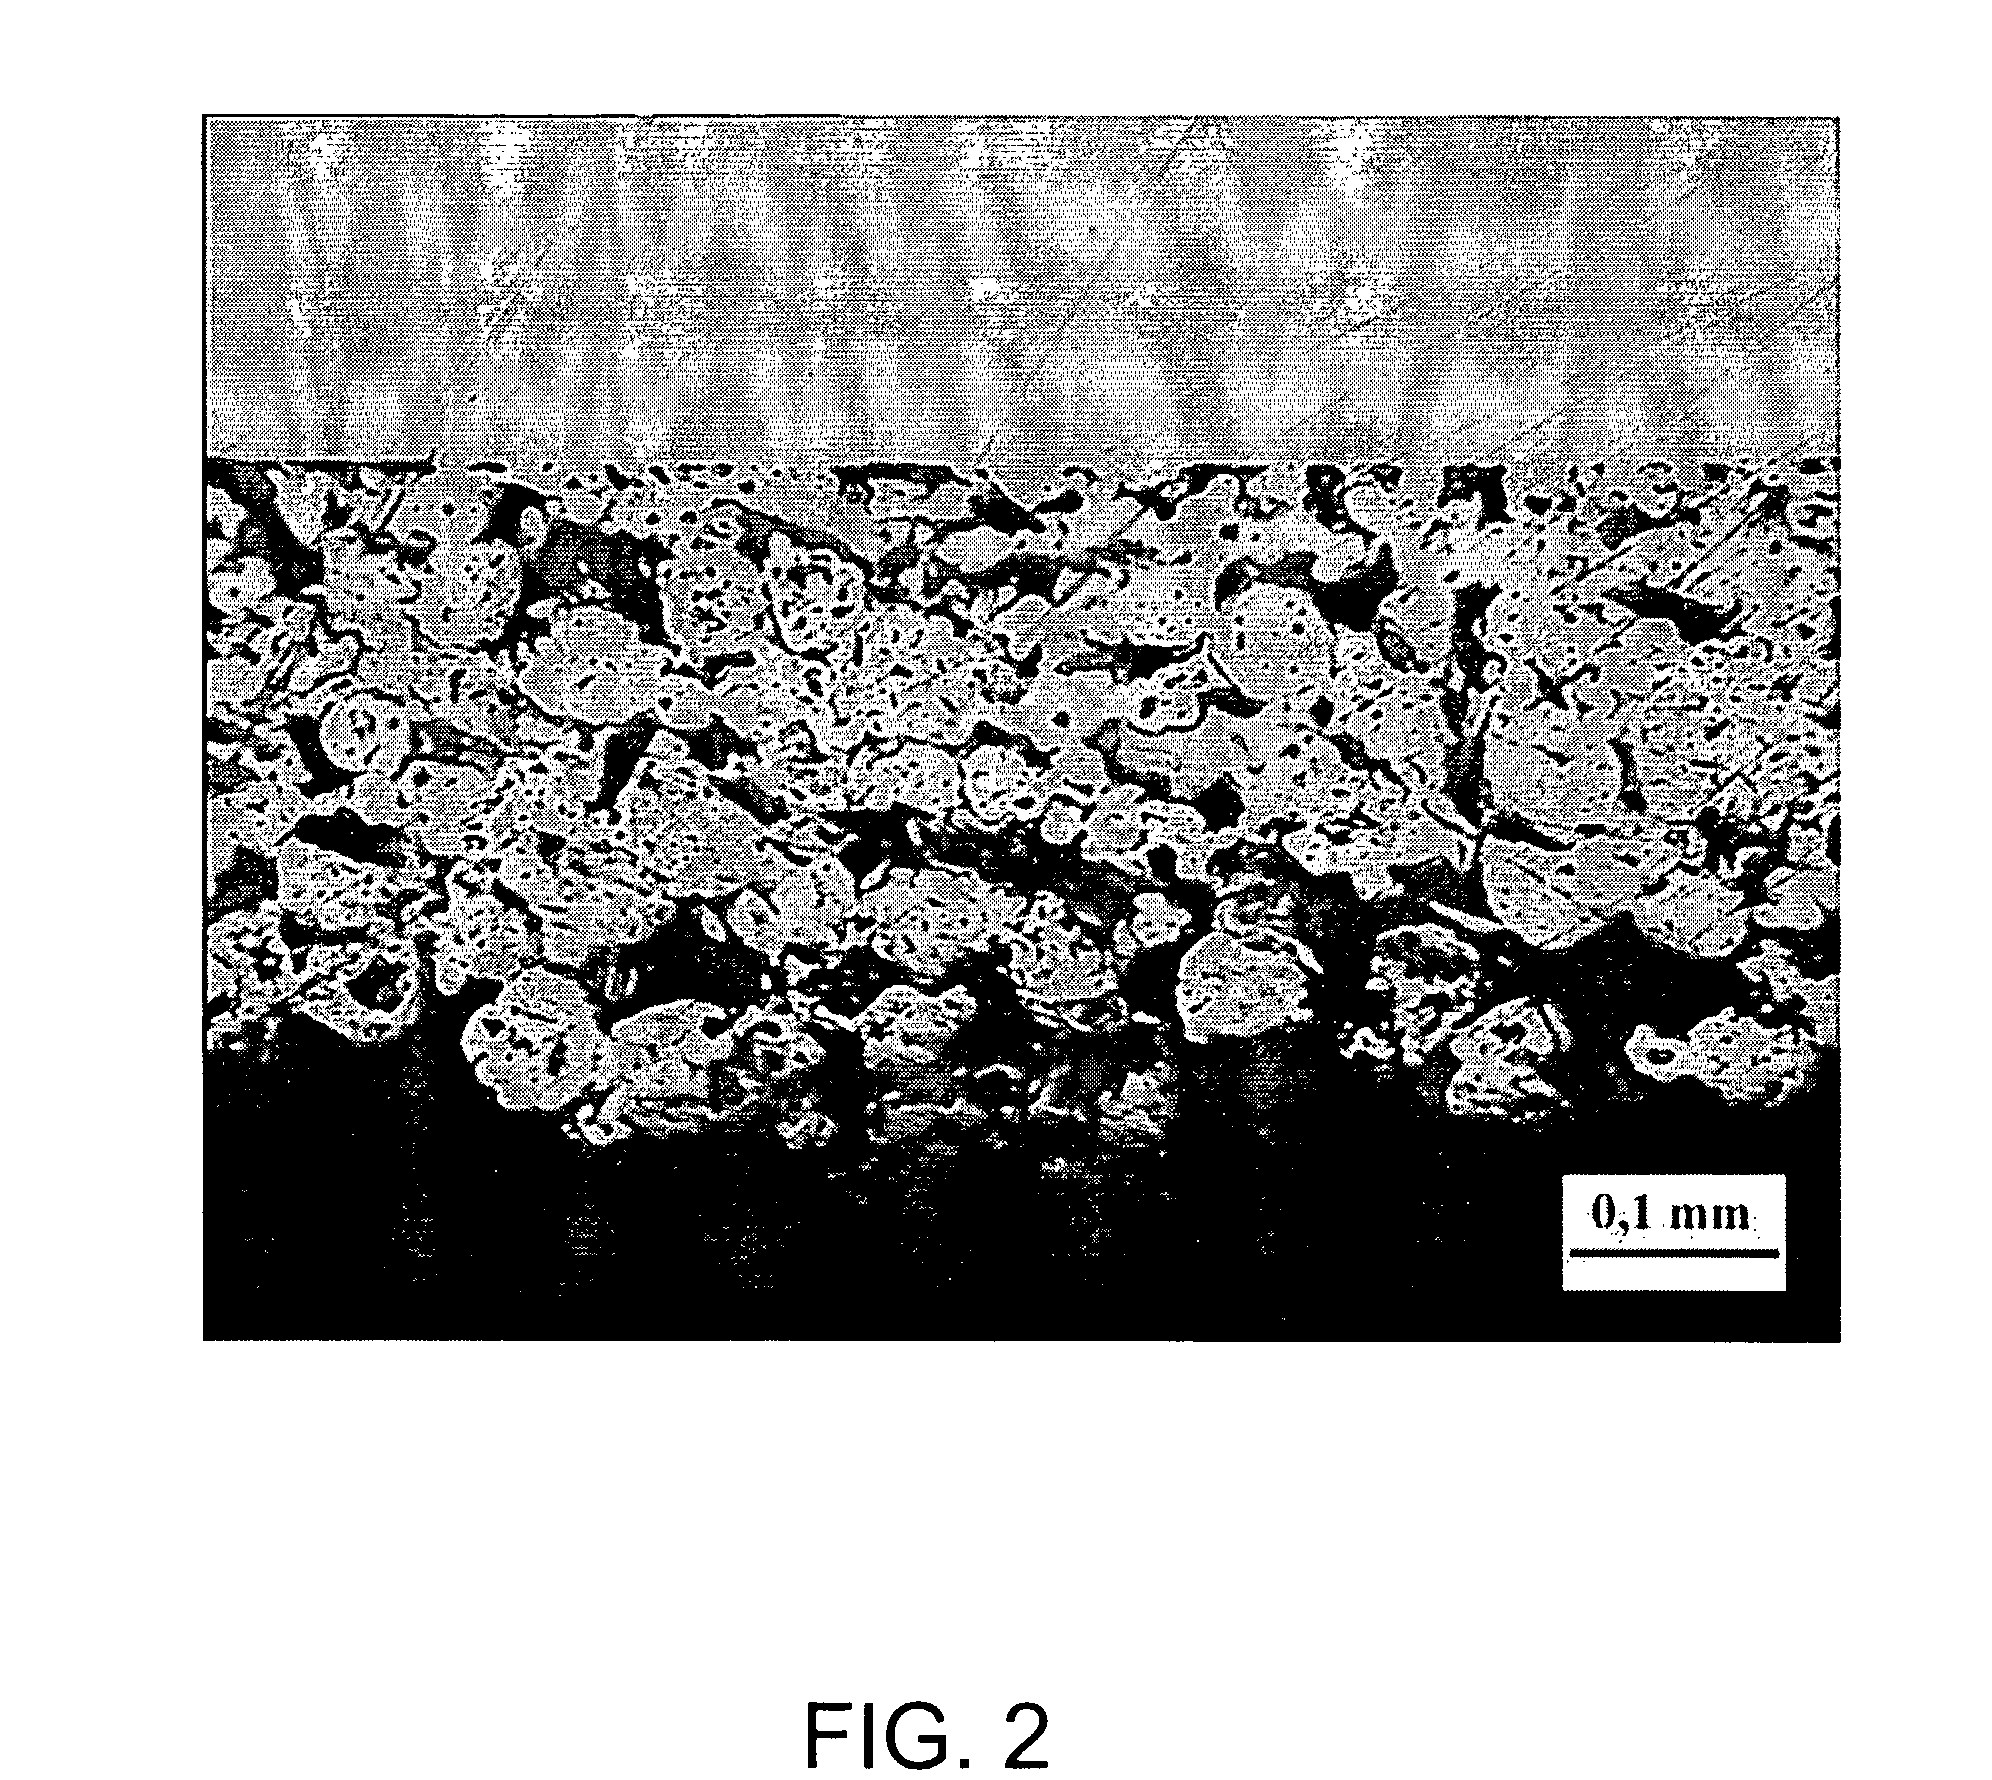 Method For Reducing Metal Oxide Powder And Attaching It To A Heat Transfer Surface And The Heat Transfer Surface